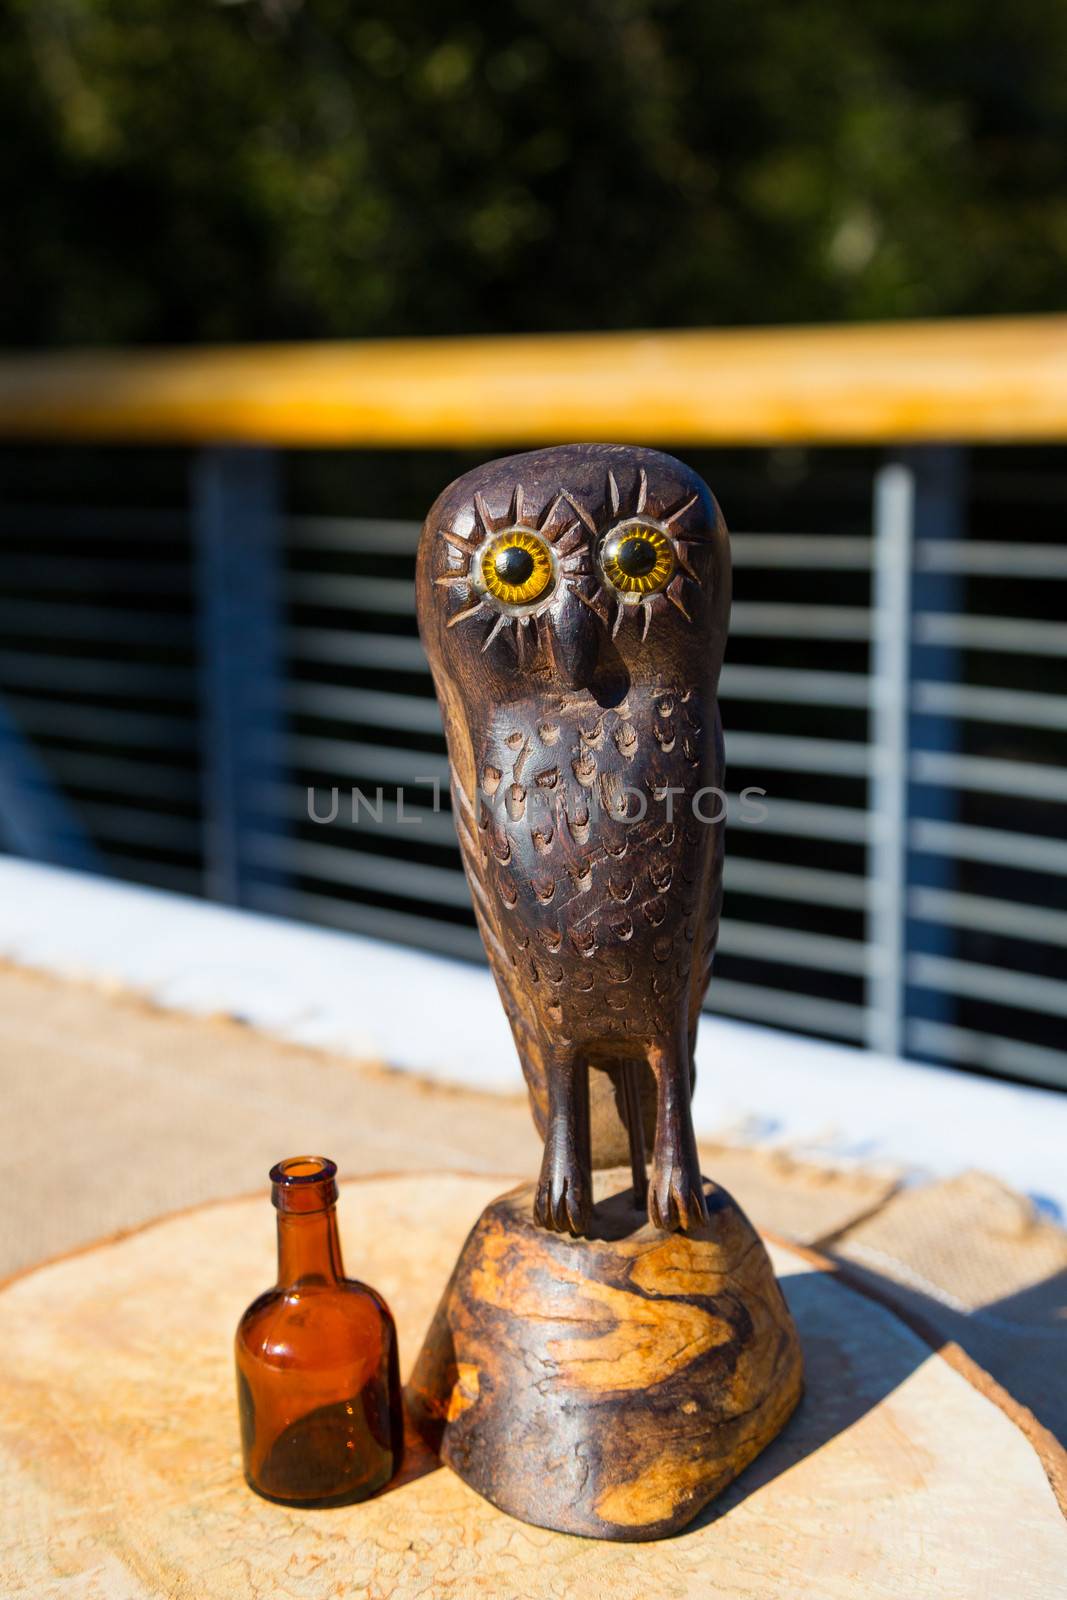 Decorations at this wedding include wooden carved owls as centerpieces for the tables.